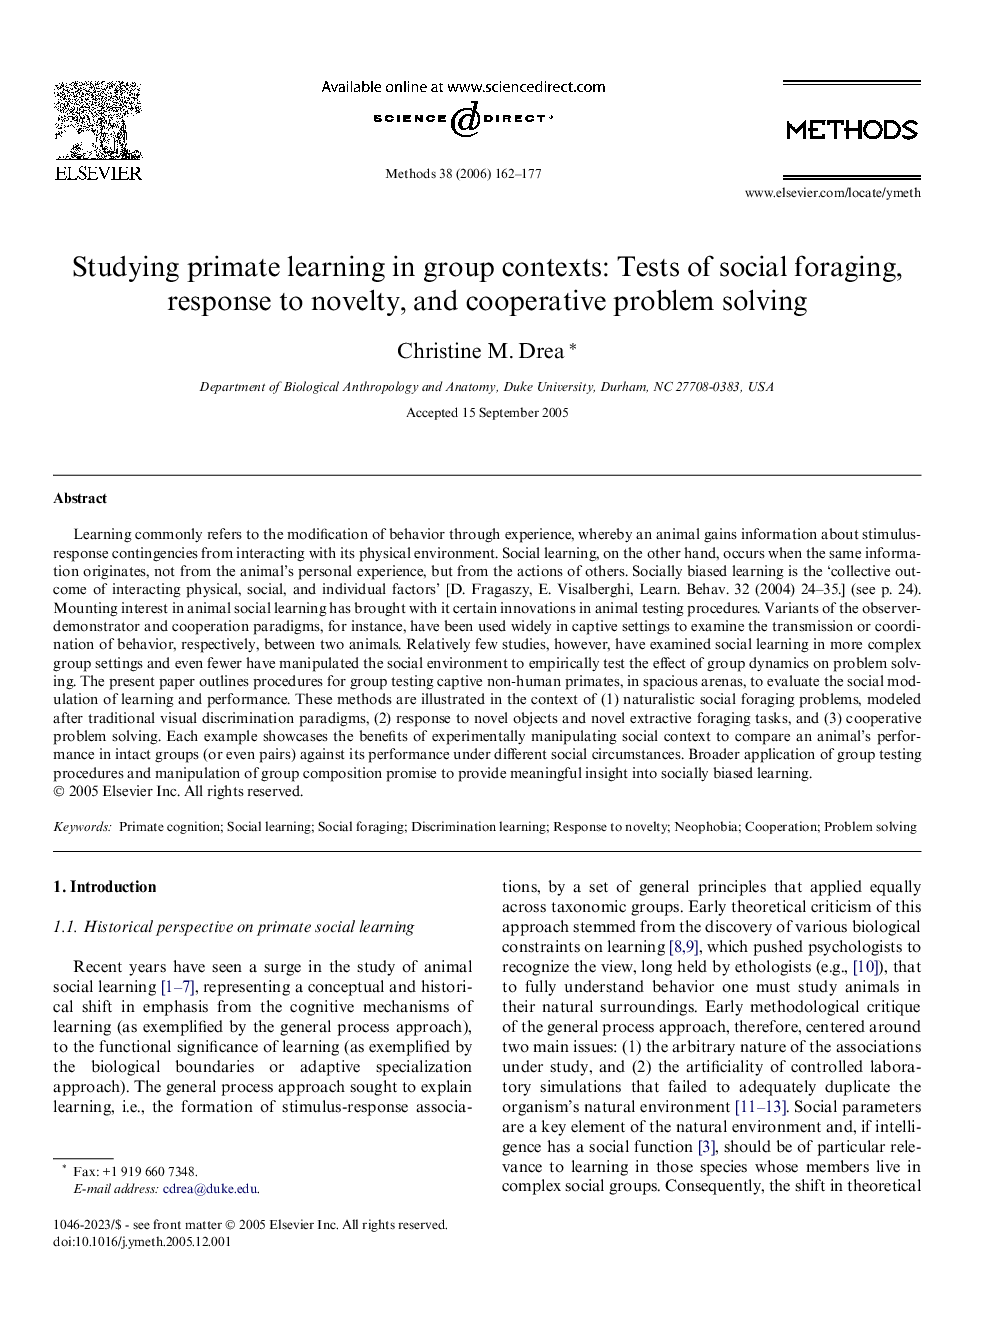 Studying primate learning in group contexts: Tests of social foraging, response to novelty, and cooperative problem solving